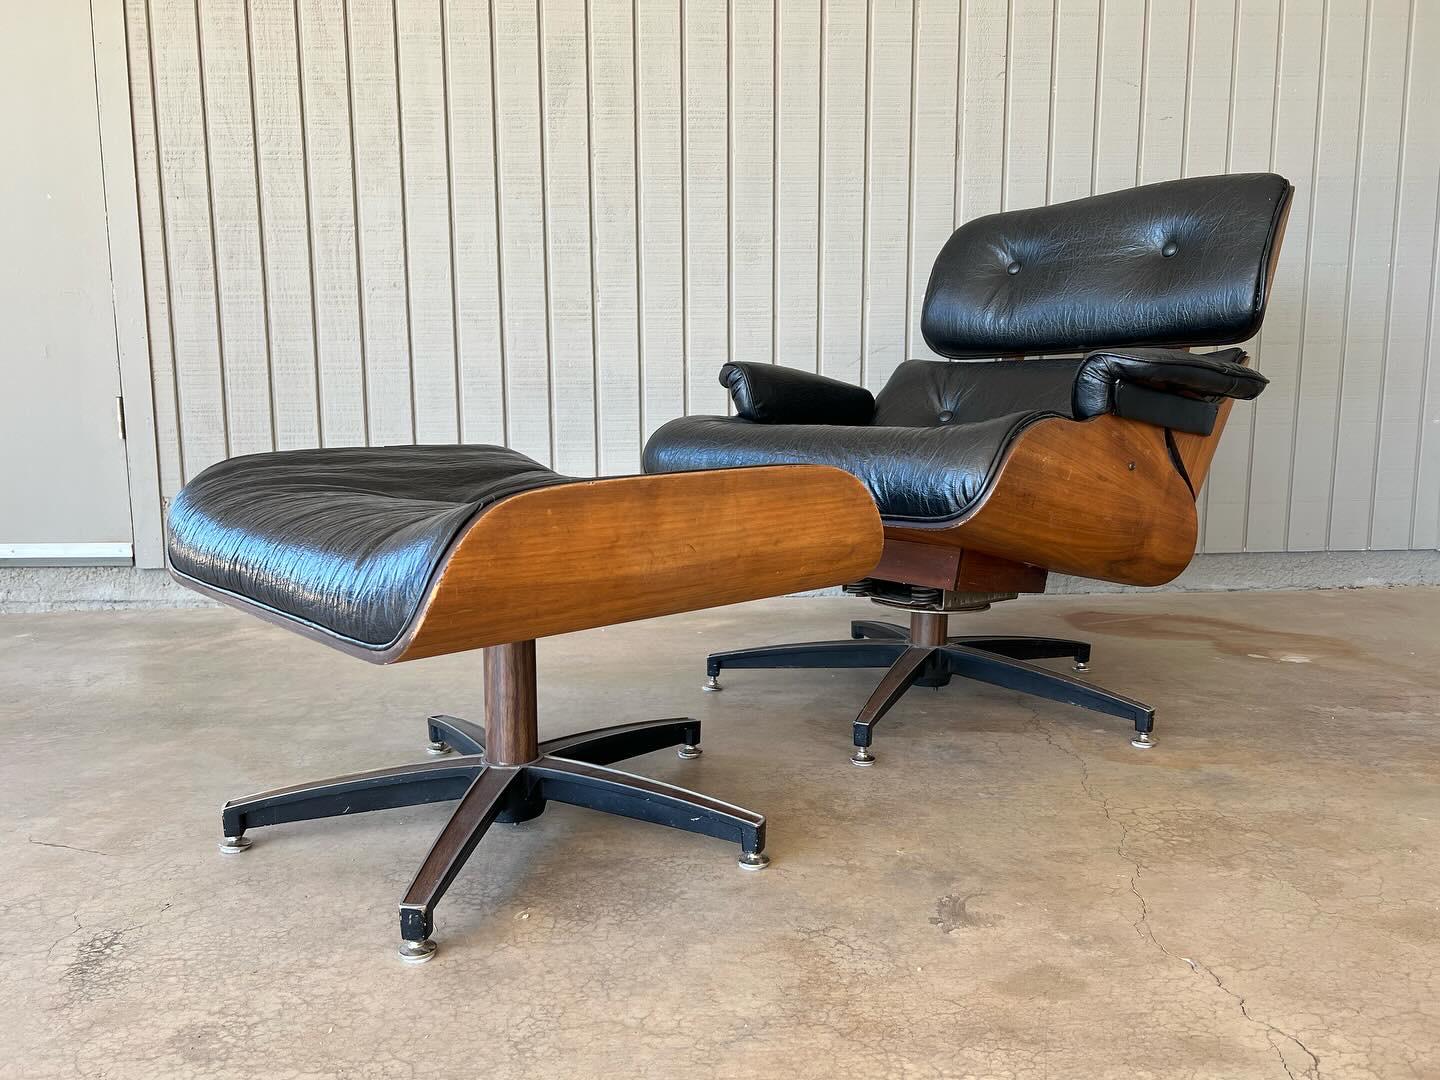 American Mid century modern vintage Eames style lounge chair and ottoman For Sale